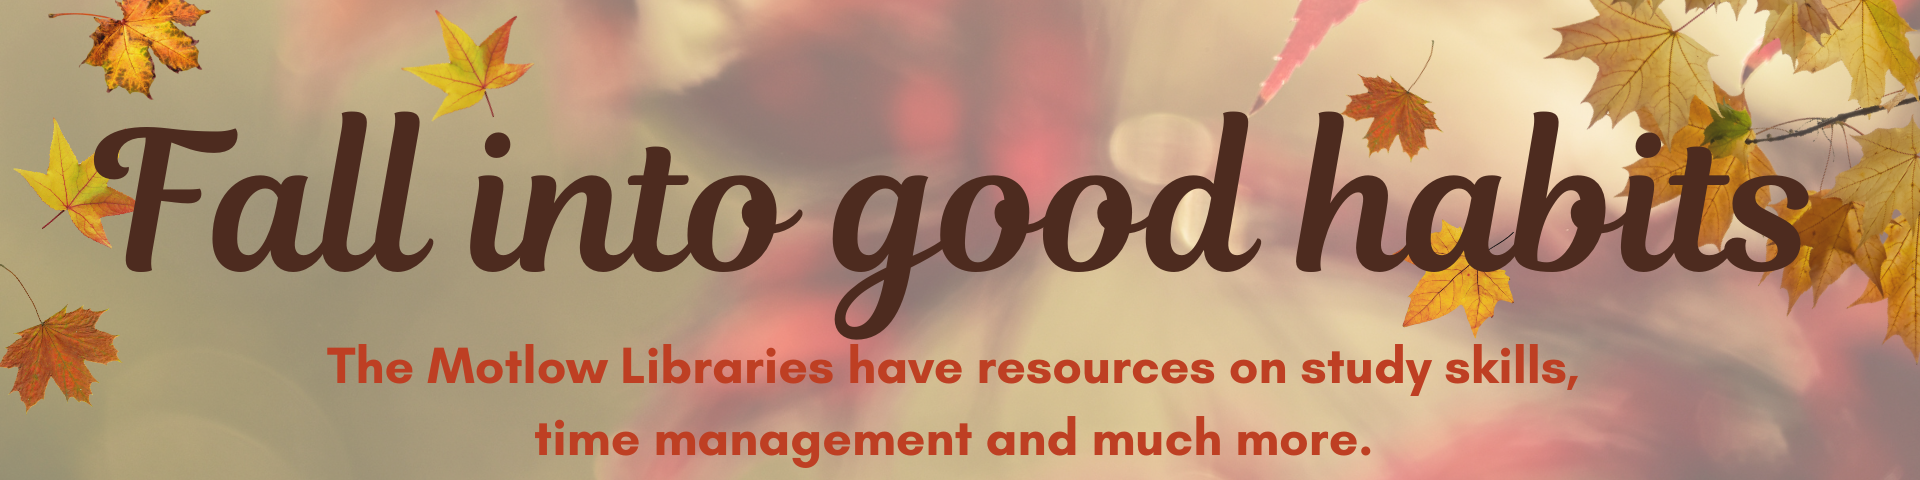 Fall into good habits with resources from the Motlow Libraries